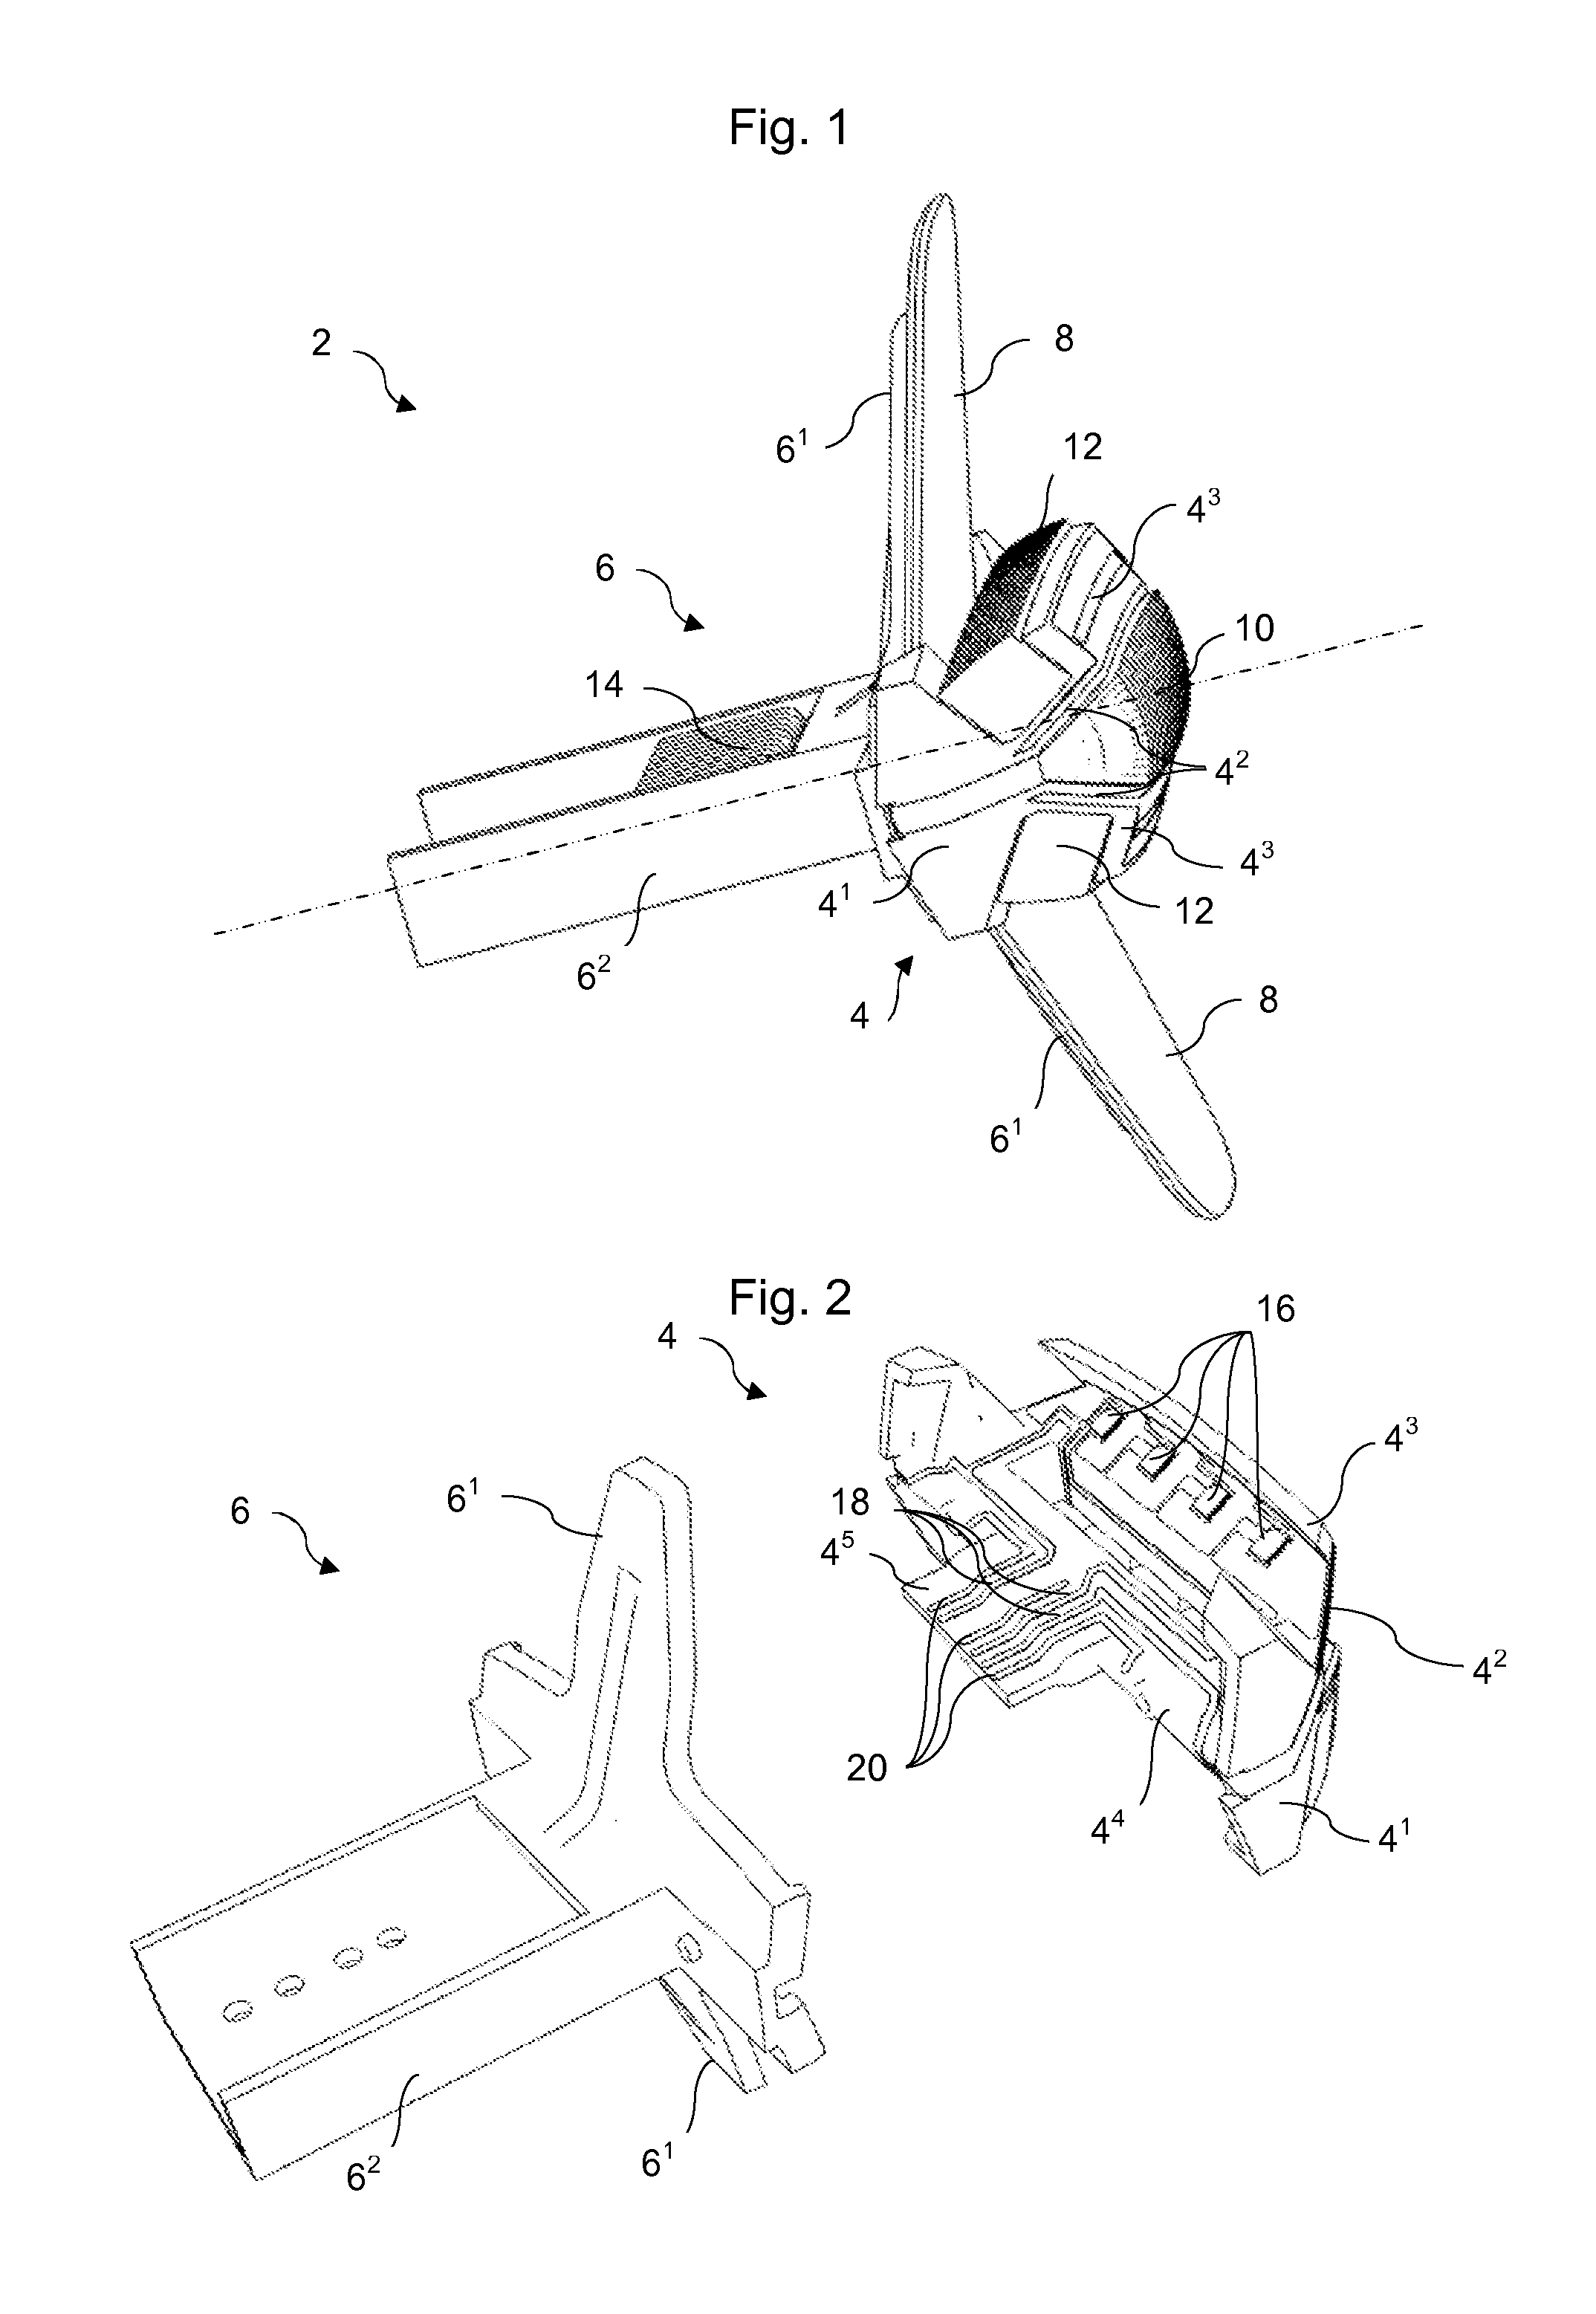 OLED diode support with elastic connection blades